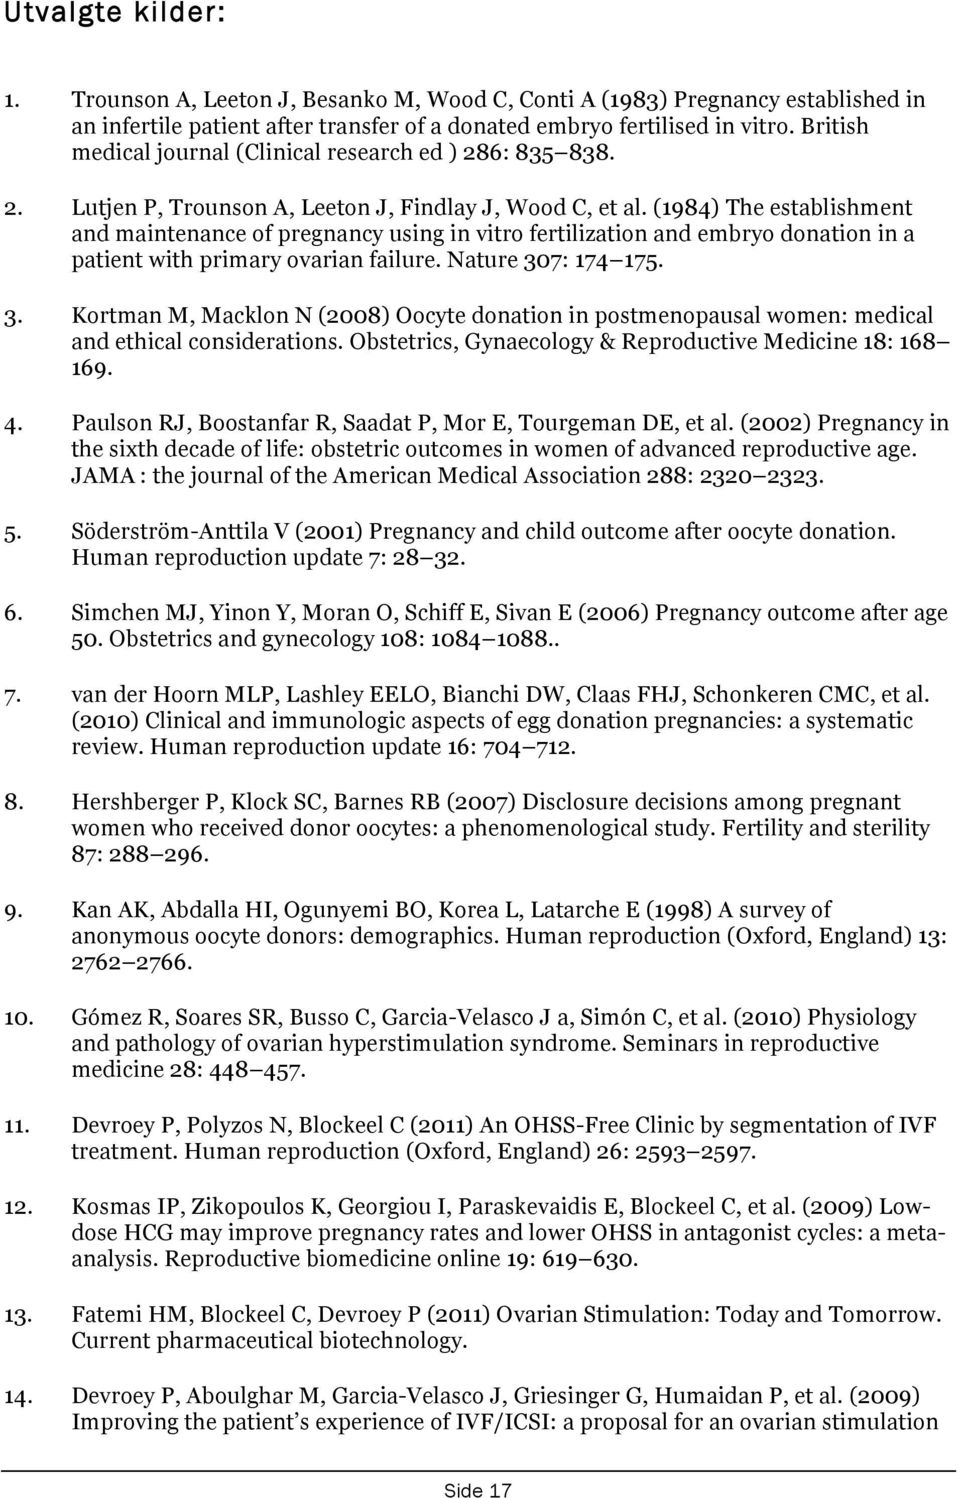 (1984) The establishment and maintenance of pregnancy using in vitro fertilization and embryo donation in a patient with primary ovarian failure. Nature 30